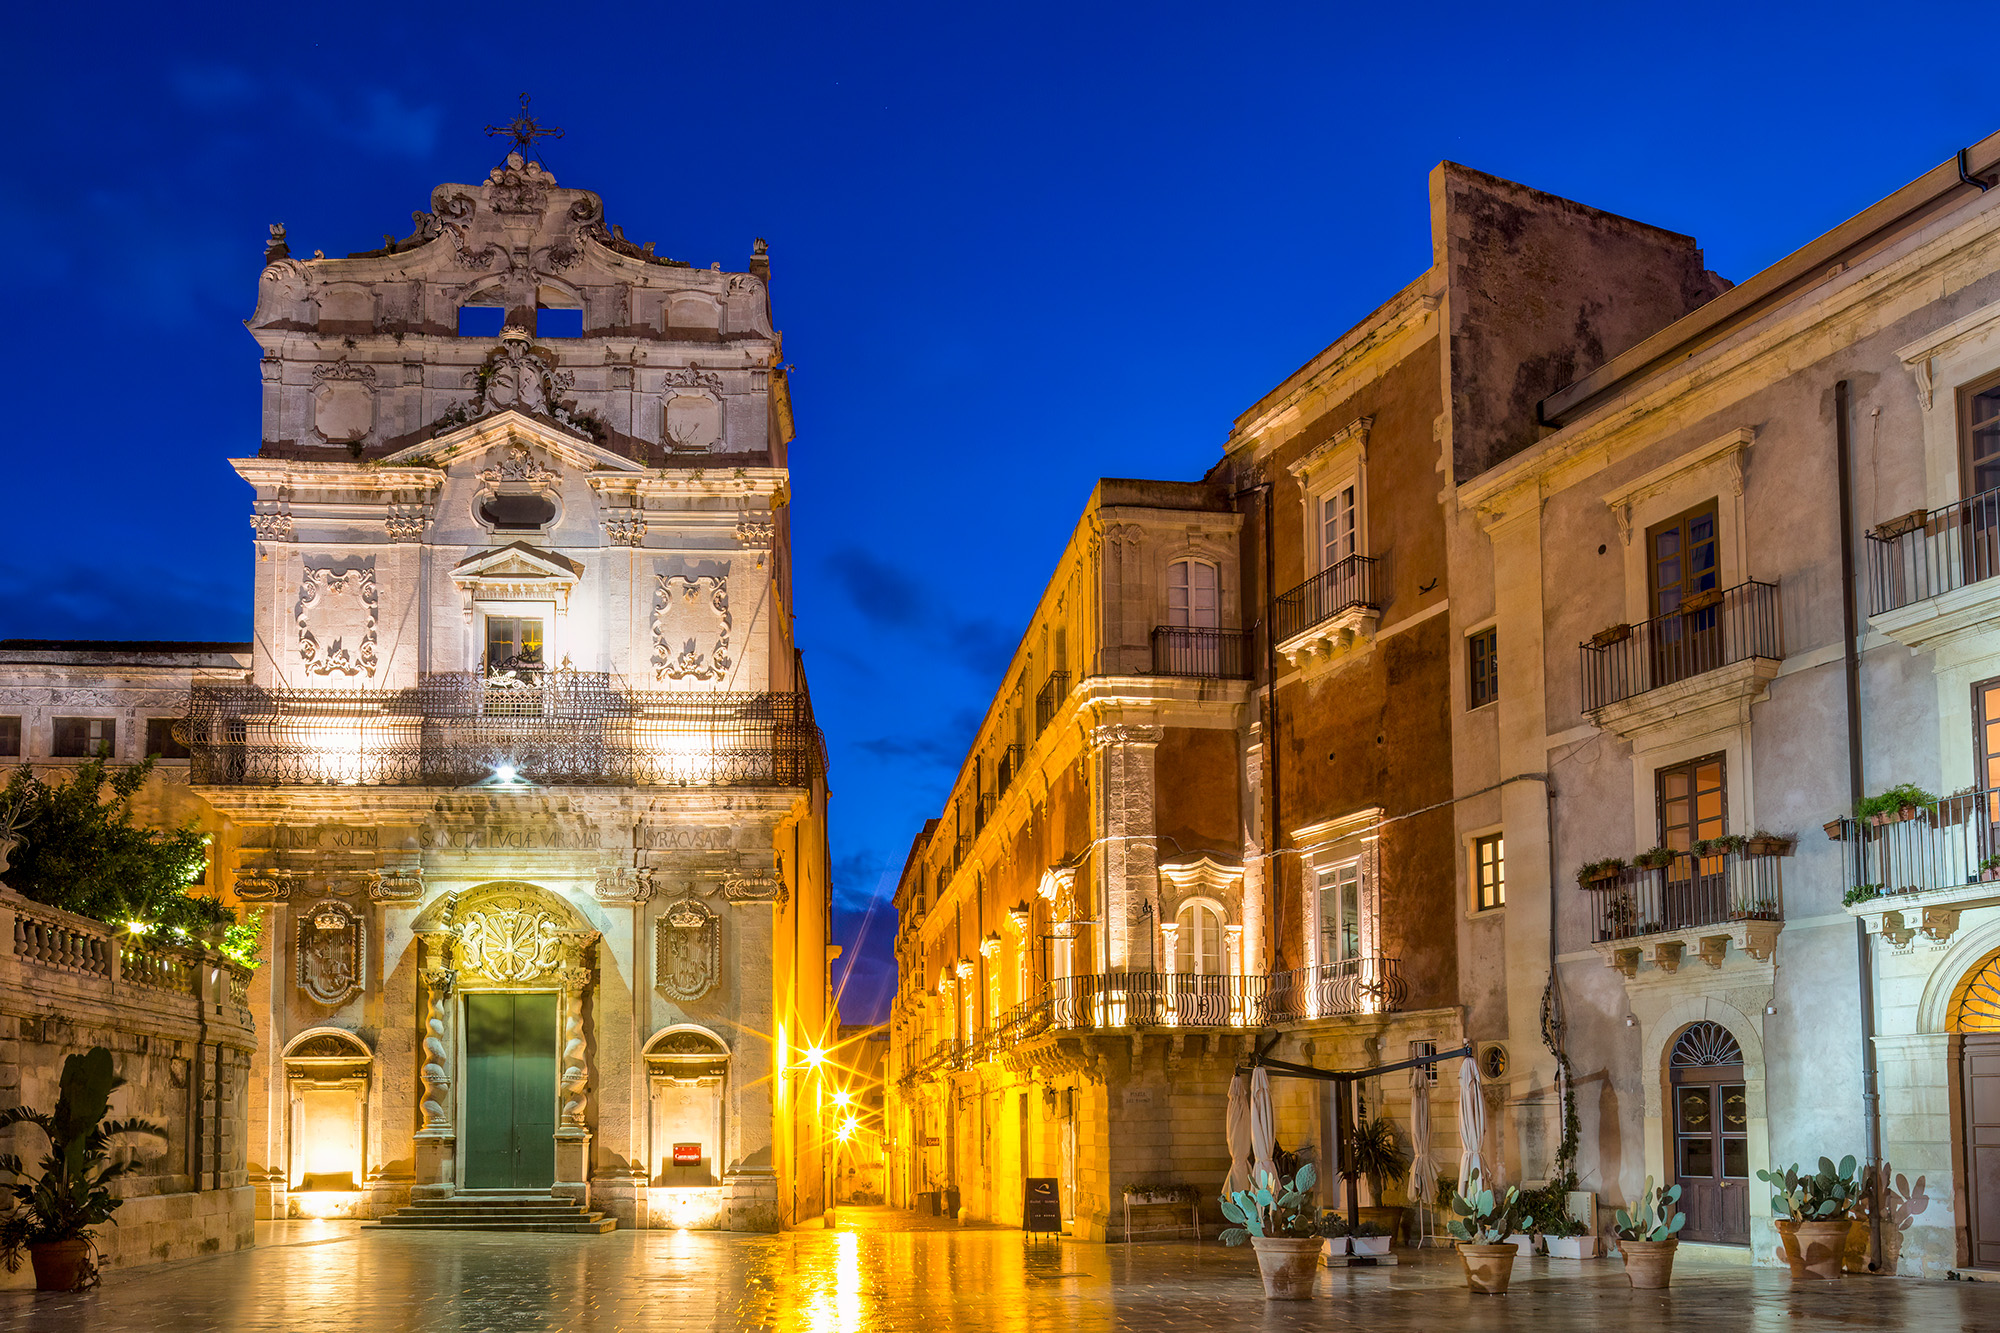 Nestled in the charming town of Siracusa, Sicily, lies Ortigia, a captivating labyrinth of ancient communities. During sunset...